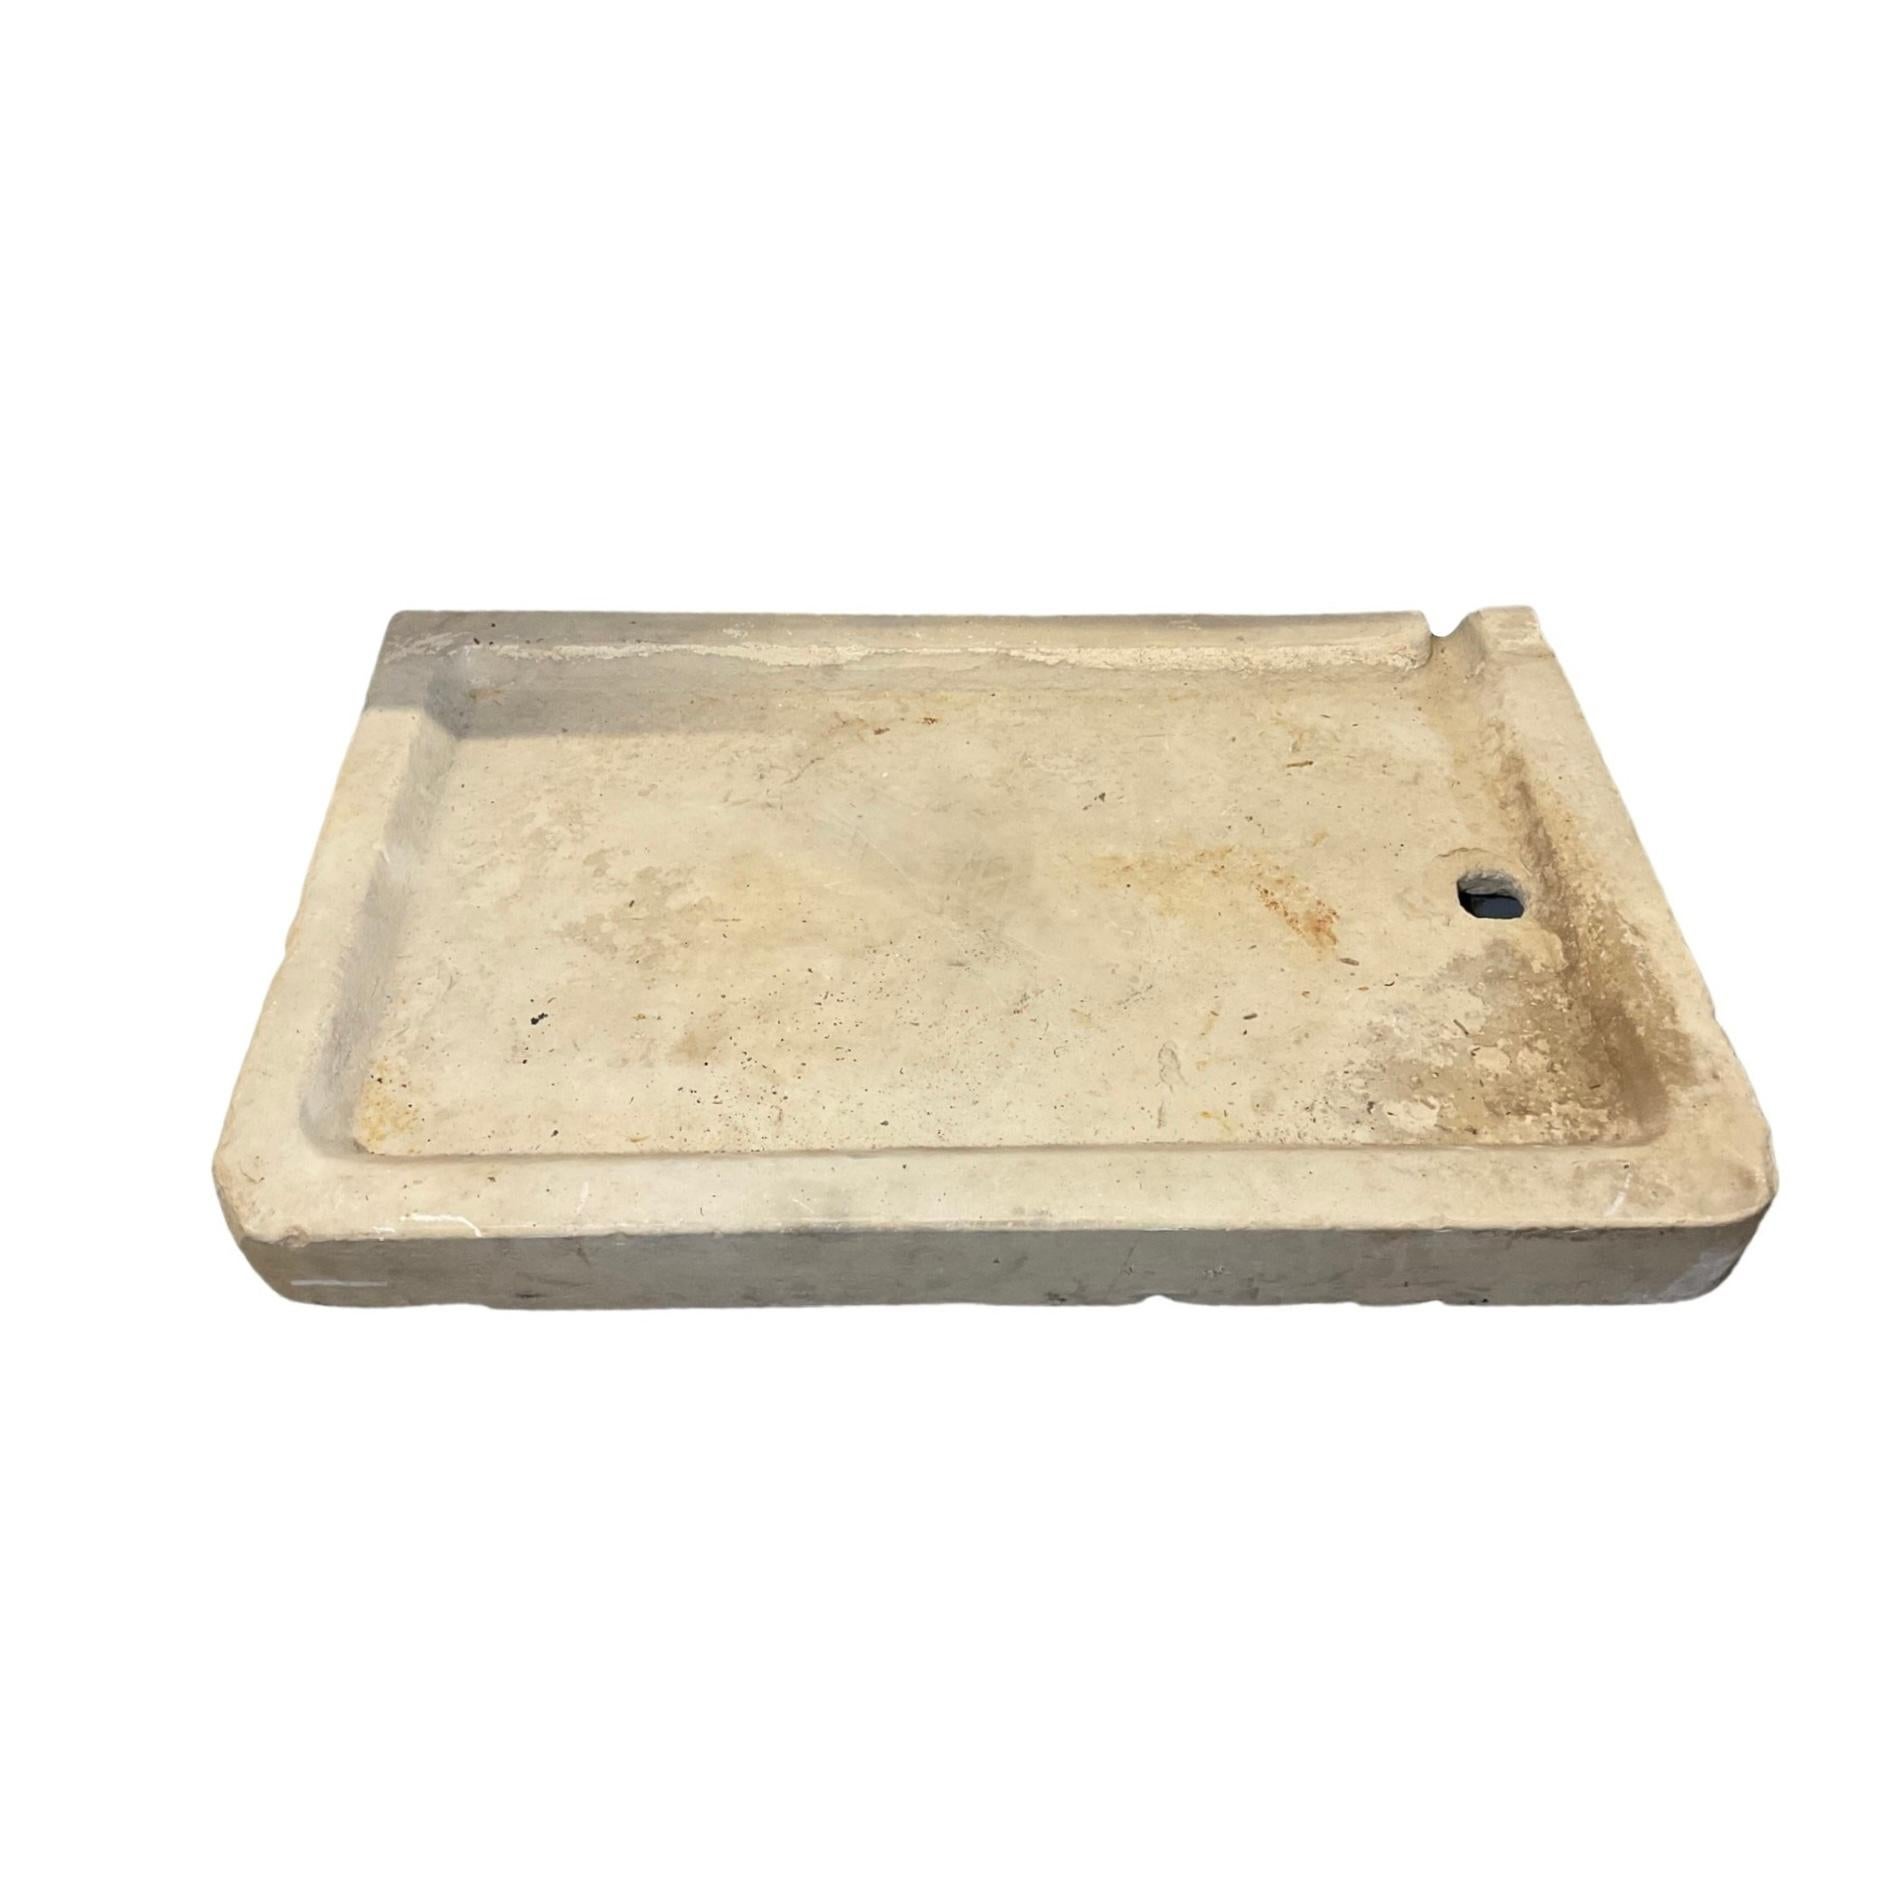 This French Burgundy Limestone Sink features a tough shape style inspired by 18th century designs. Durable, elegant, and stylish, this sink is a perfect addition to any modern bathroom.